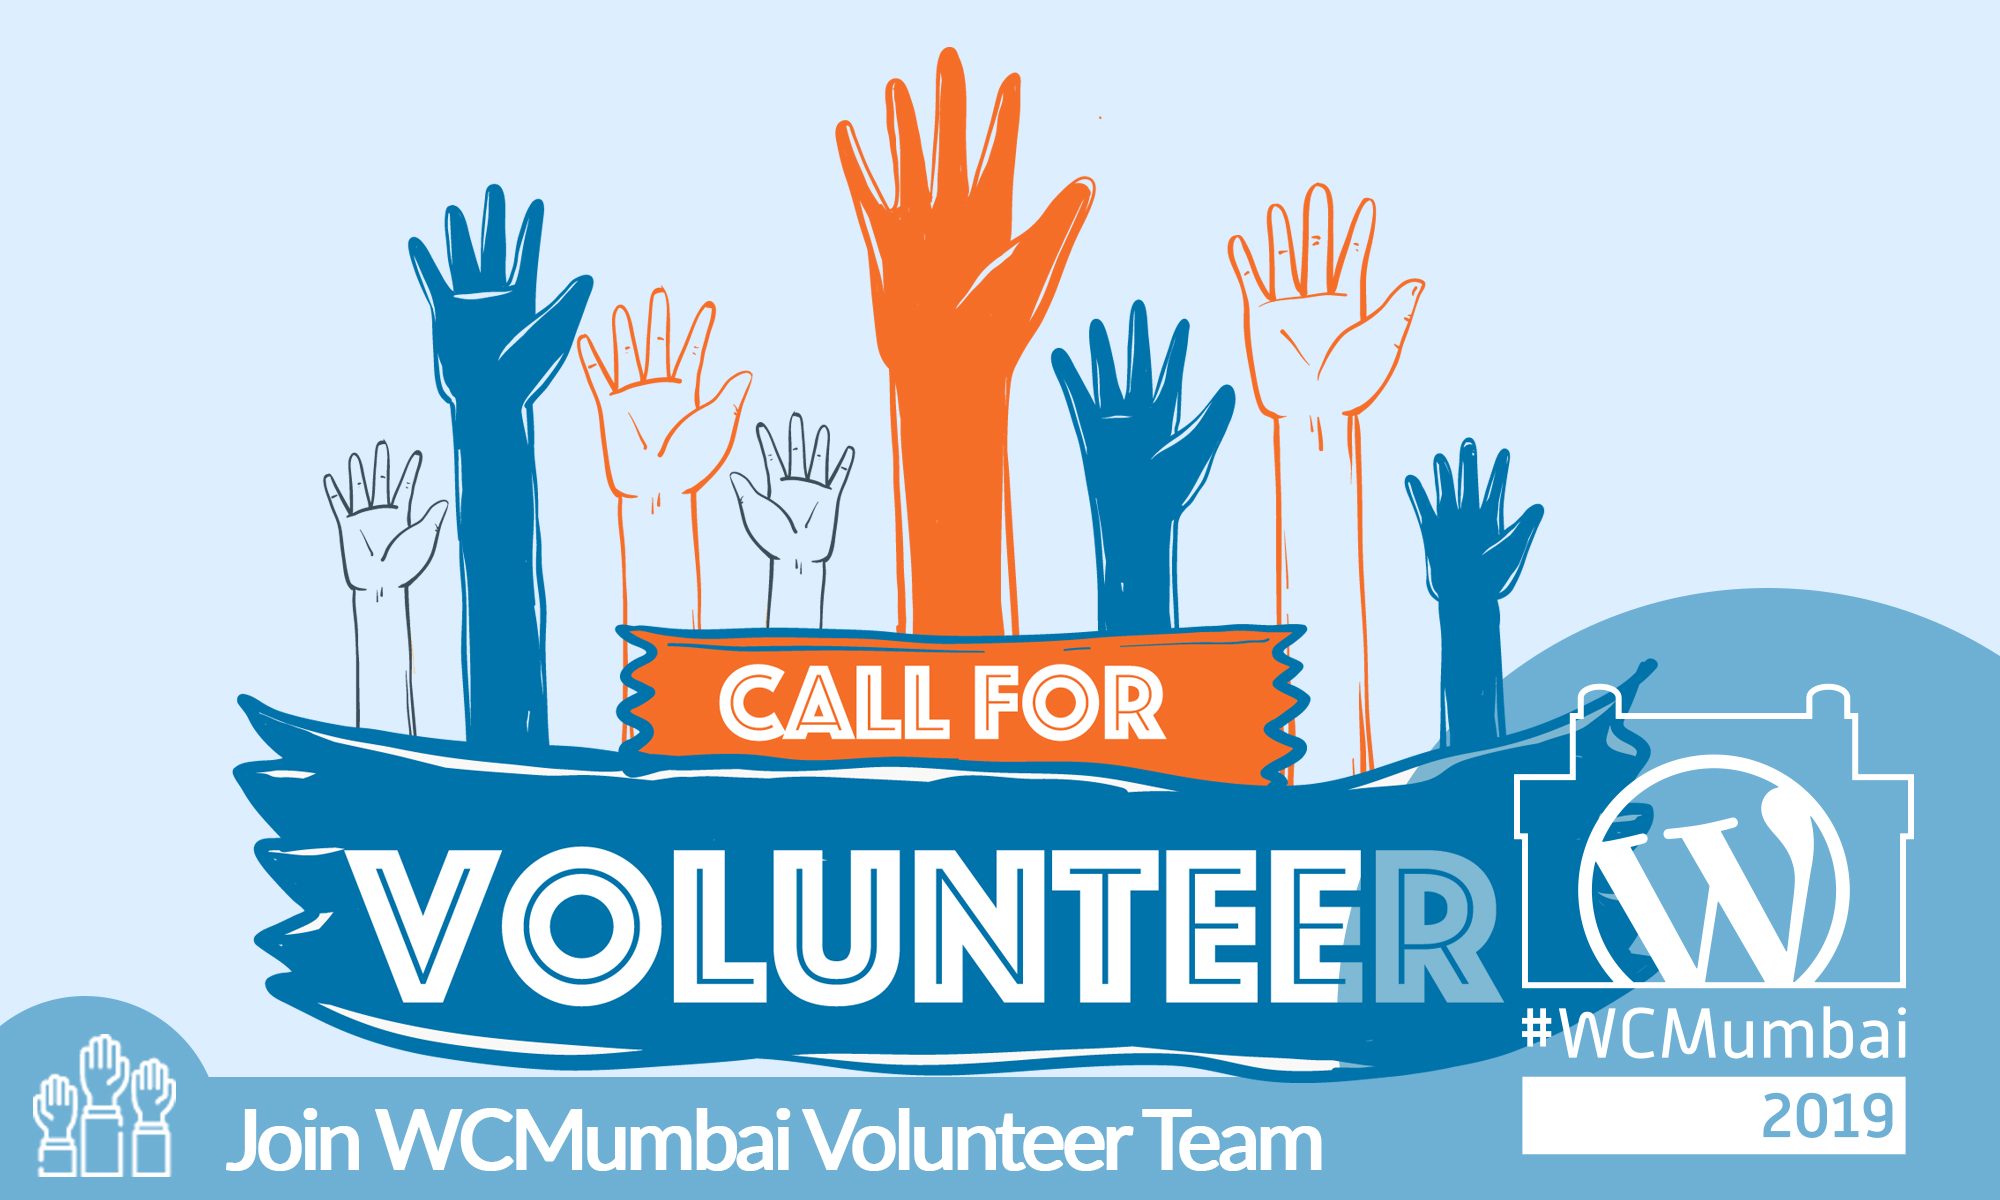 Call For Volunteer